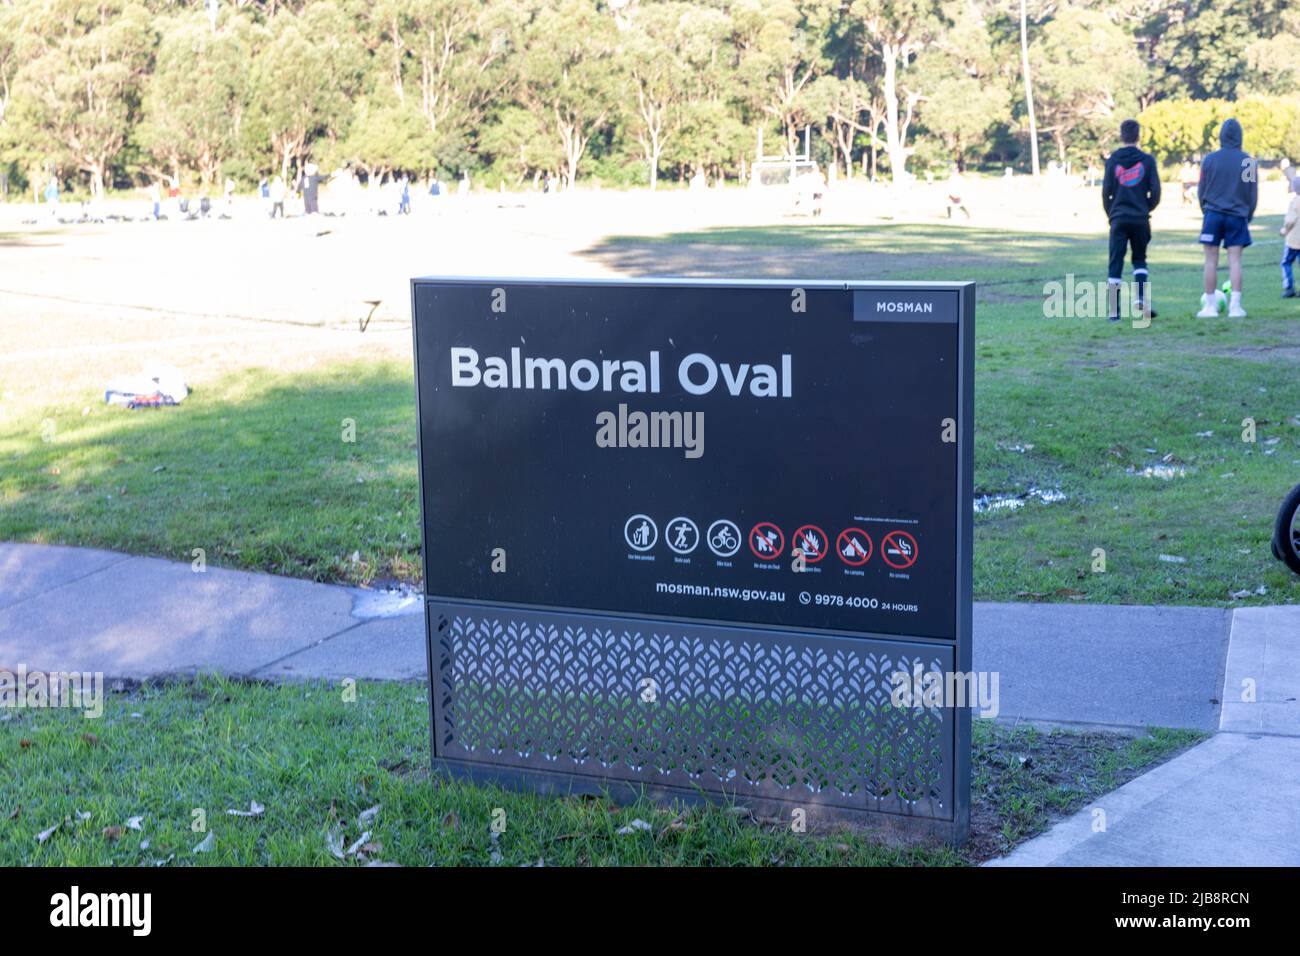 Balmoral sports oval in the beach suburb of Balmoral in Mosman,Sydney, used for rugby and football soccer matches,NSW,Australia Stock Photo